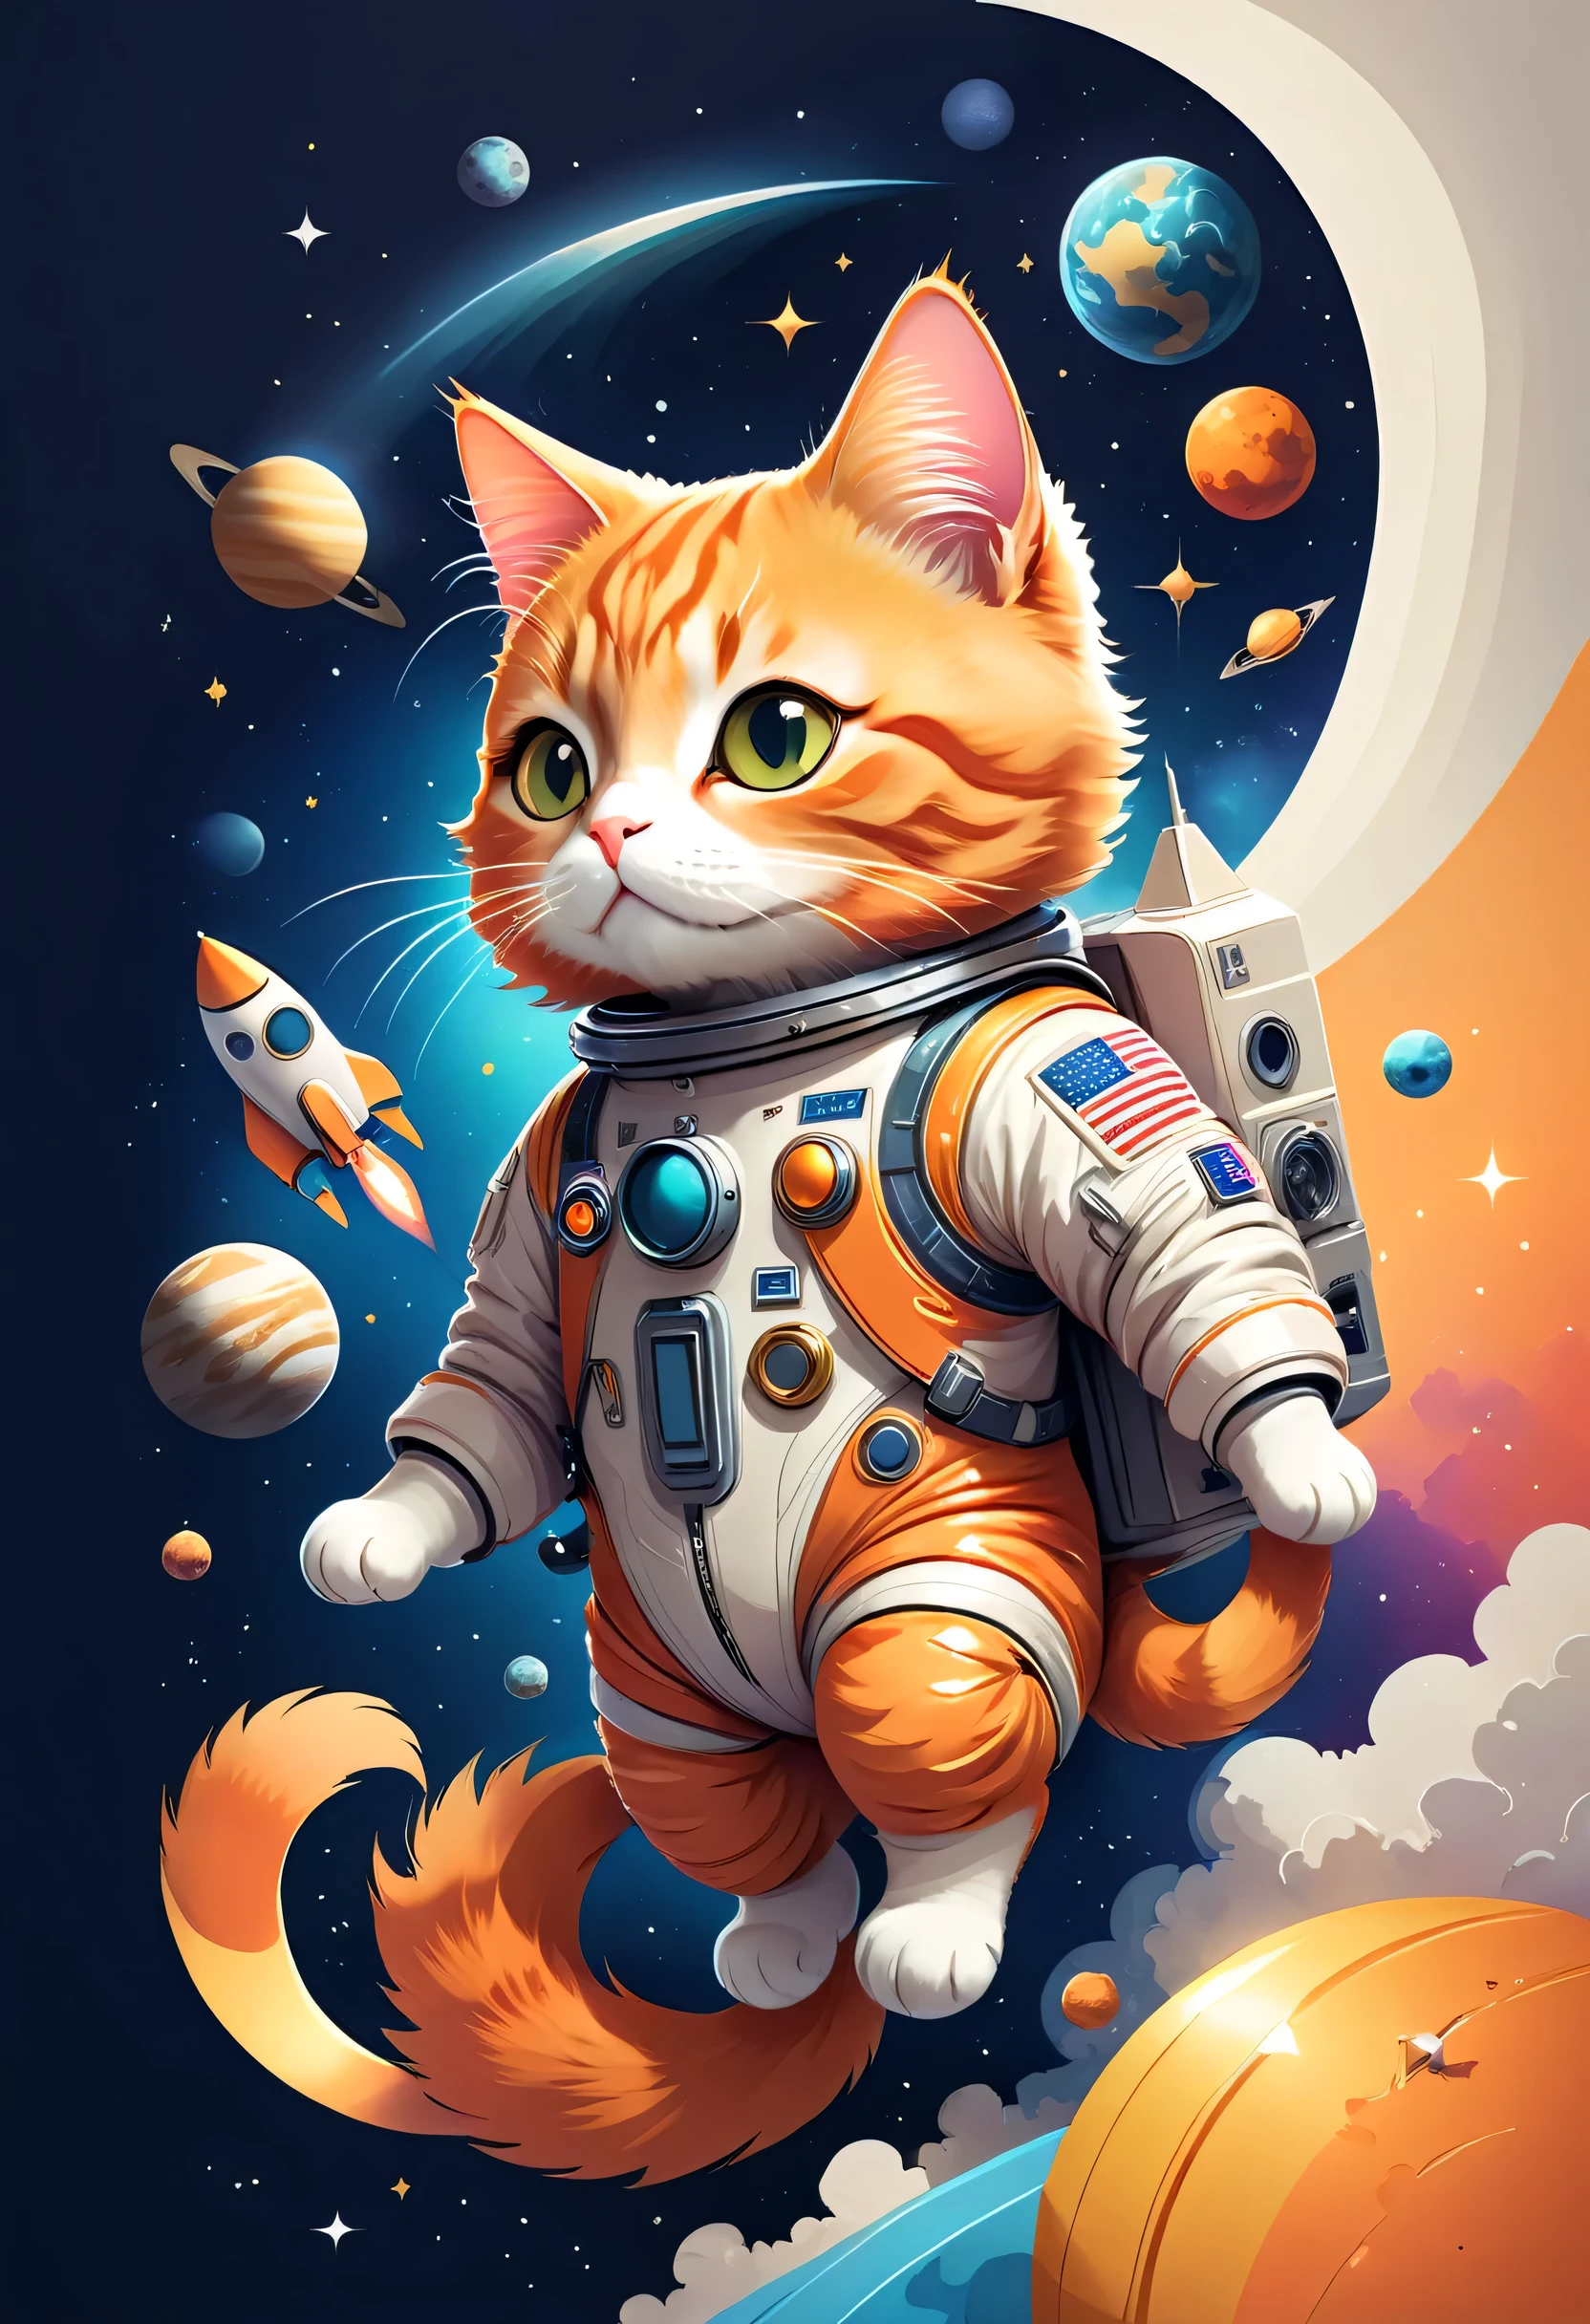 vector art:Cat astronaut,draw with thick lines,illustration,adobe,flat design,Works created by professional designers,超Brilliant宇宙旅行,orange cat:Spacesuit,Rocket emblem,technology,adventure,Inside the spaceship,Stainless steel panel,monitor,Control panel,spaceship windows,no gravity,buoyant,floating object,cute,Fantastic,Brilliant,Bokeh effect,fun,Wonderful,joy,masterpiece,最高masterpiece,rich colors,colorful,cool,rendering,zentangle elements,line art,